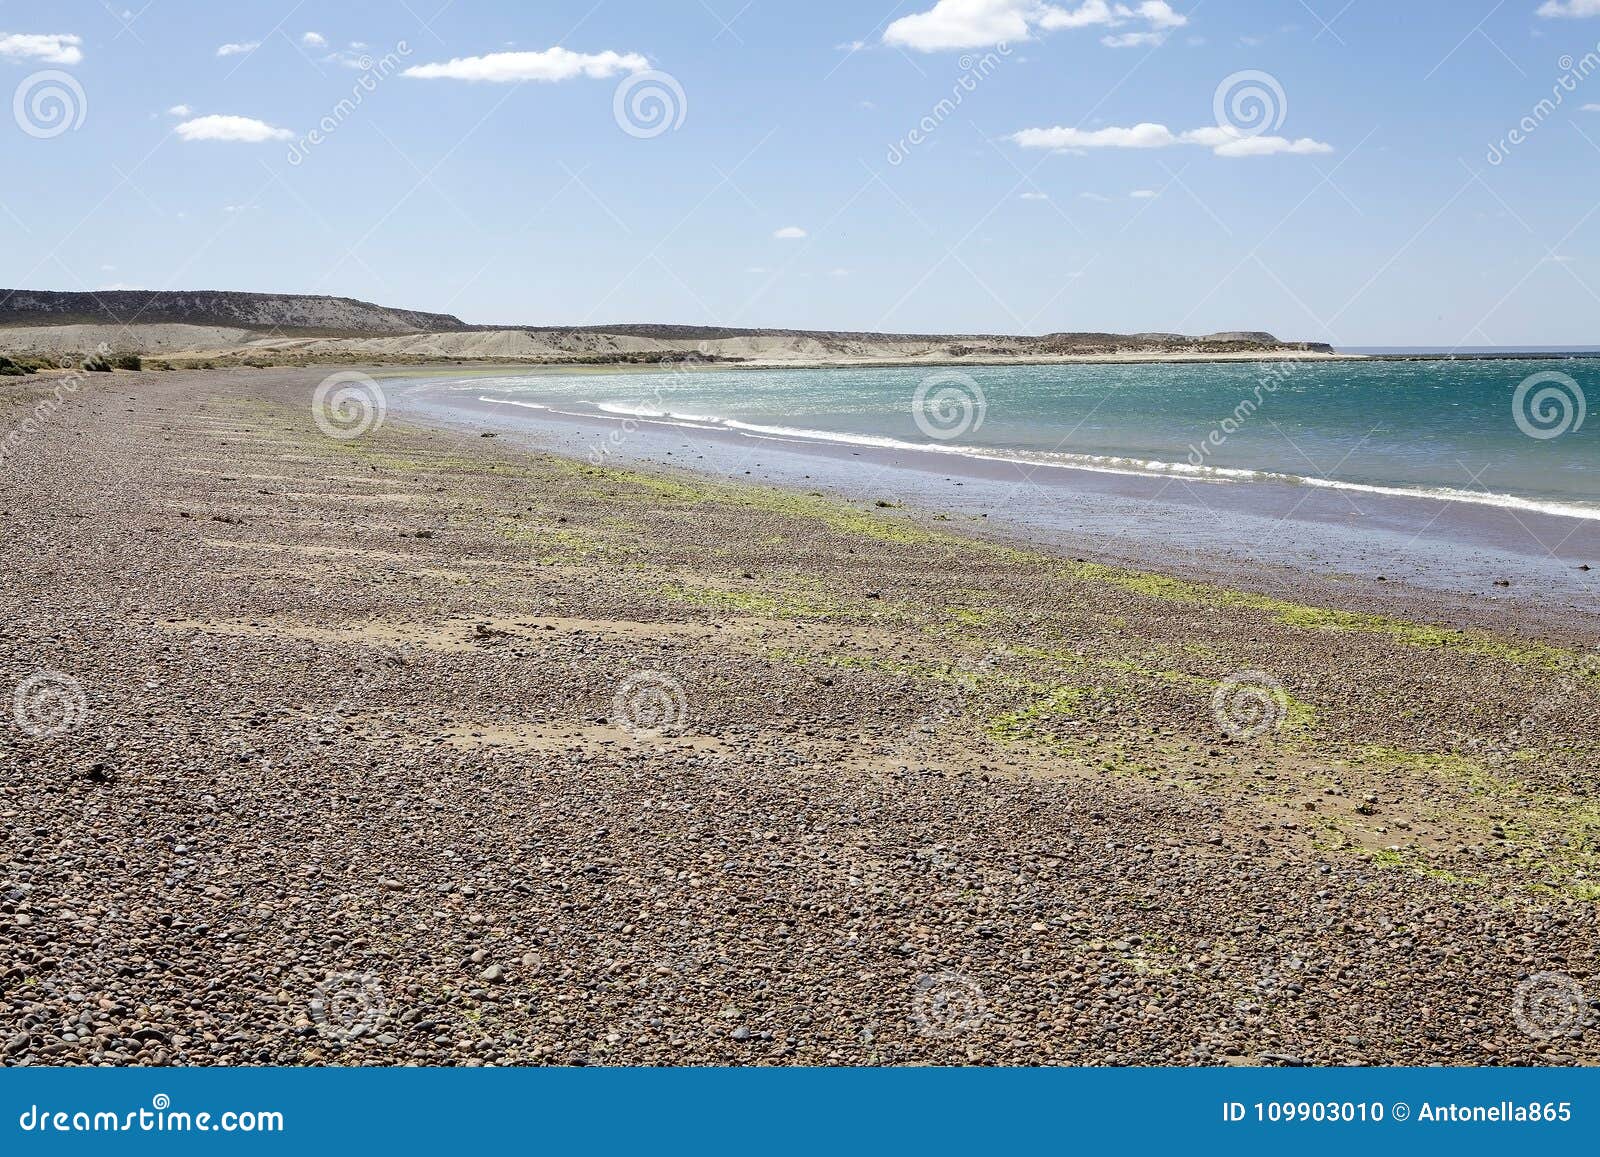 beach near puerto madryn, a city in chubut province, patagonia, argentina